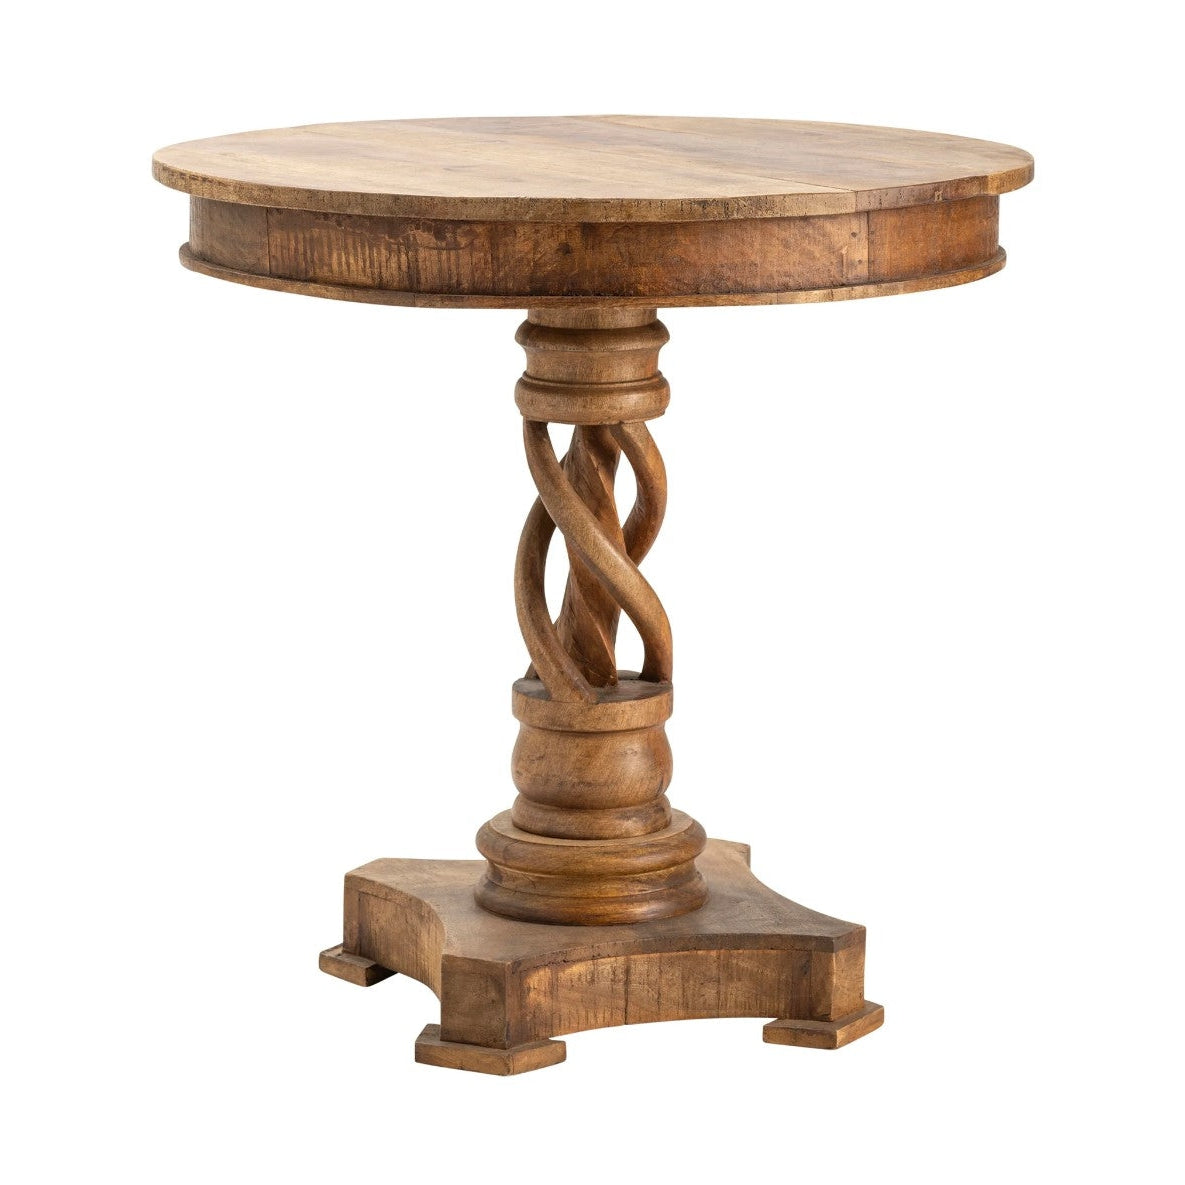 Crestview Collection Bengal Manor 30" x 30" x 30" Rustic Mango Wood Twist Accent Table In Natural Wood Finish